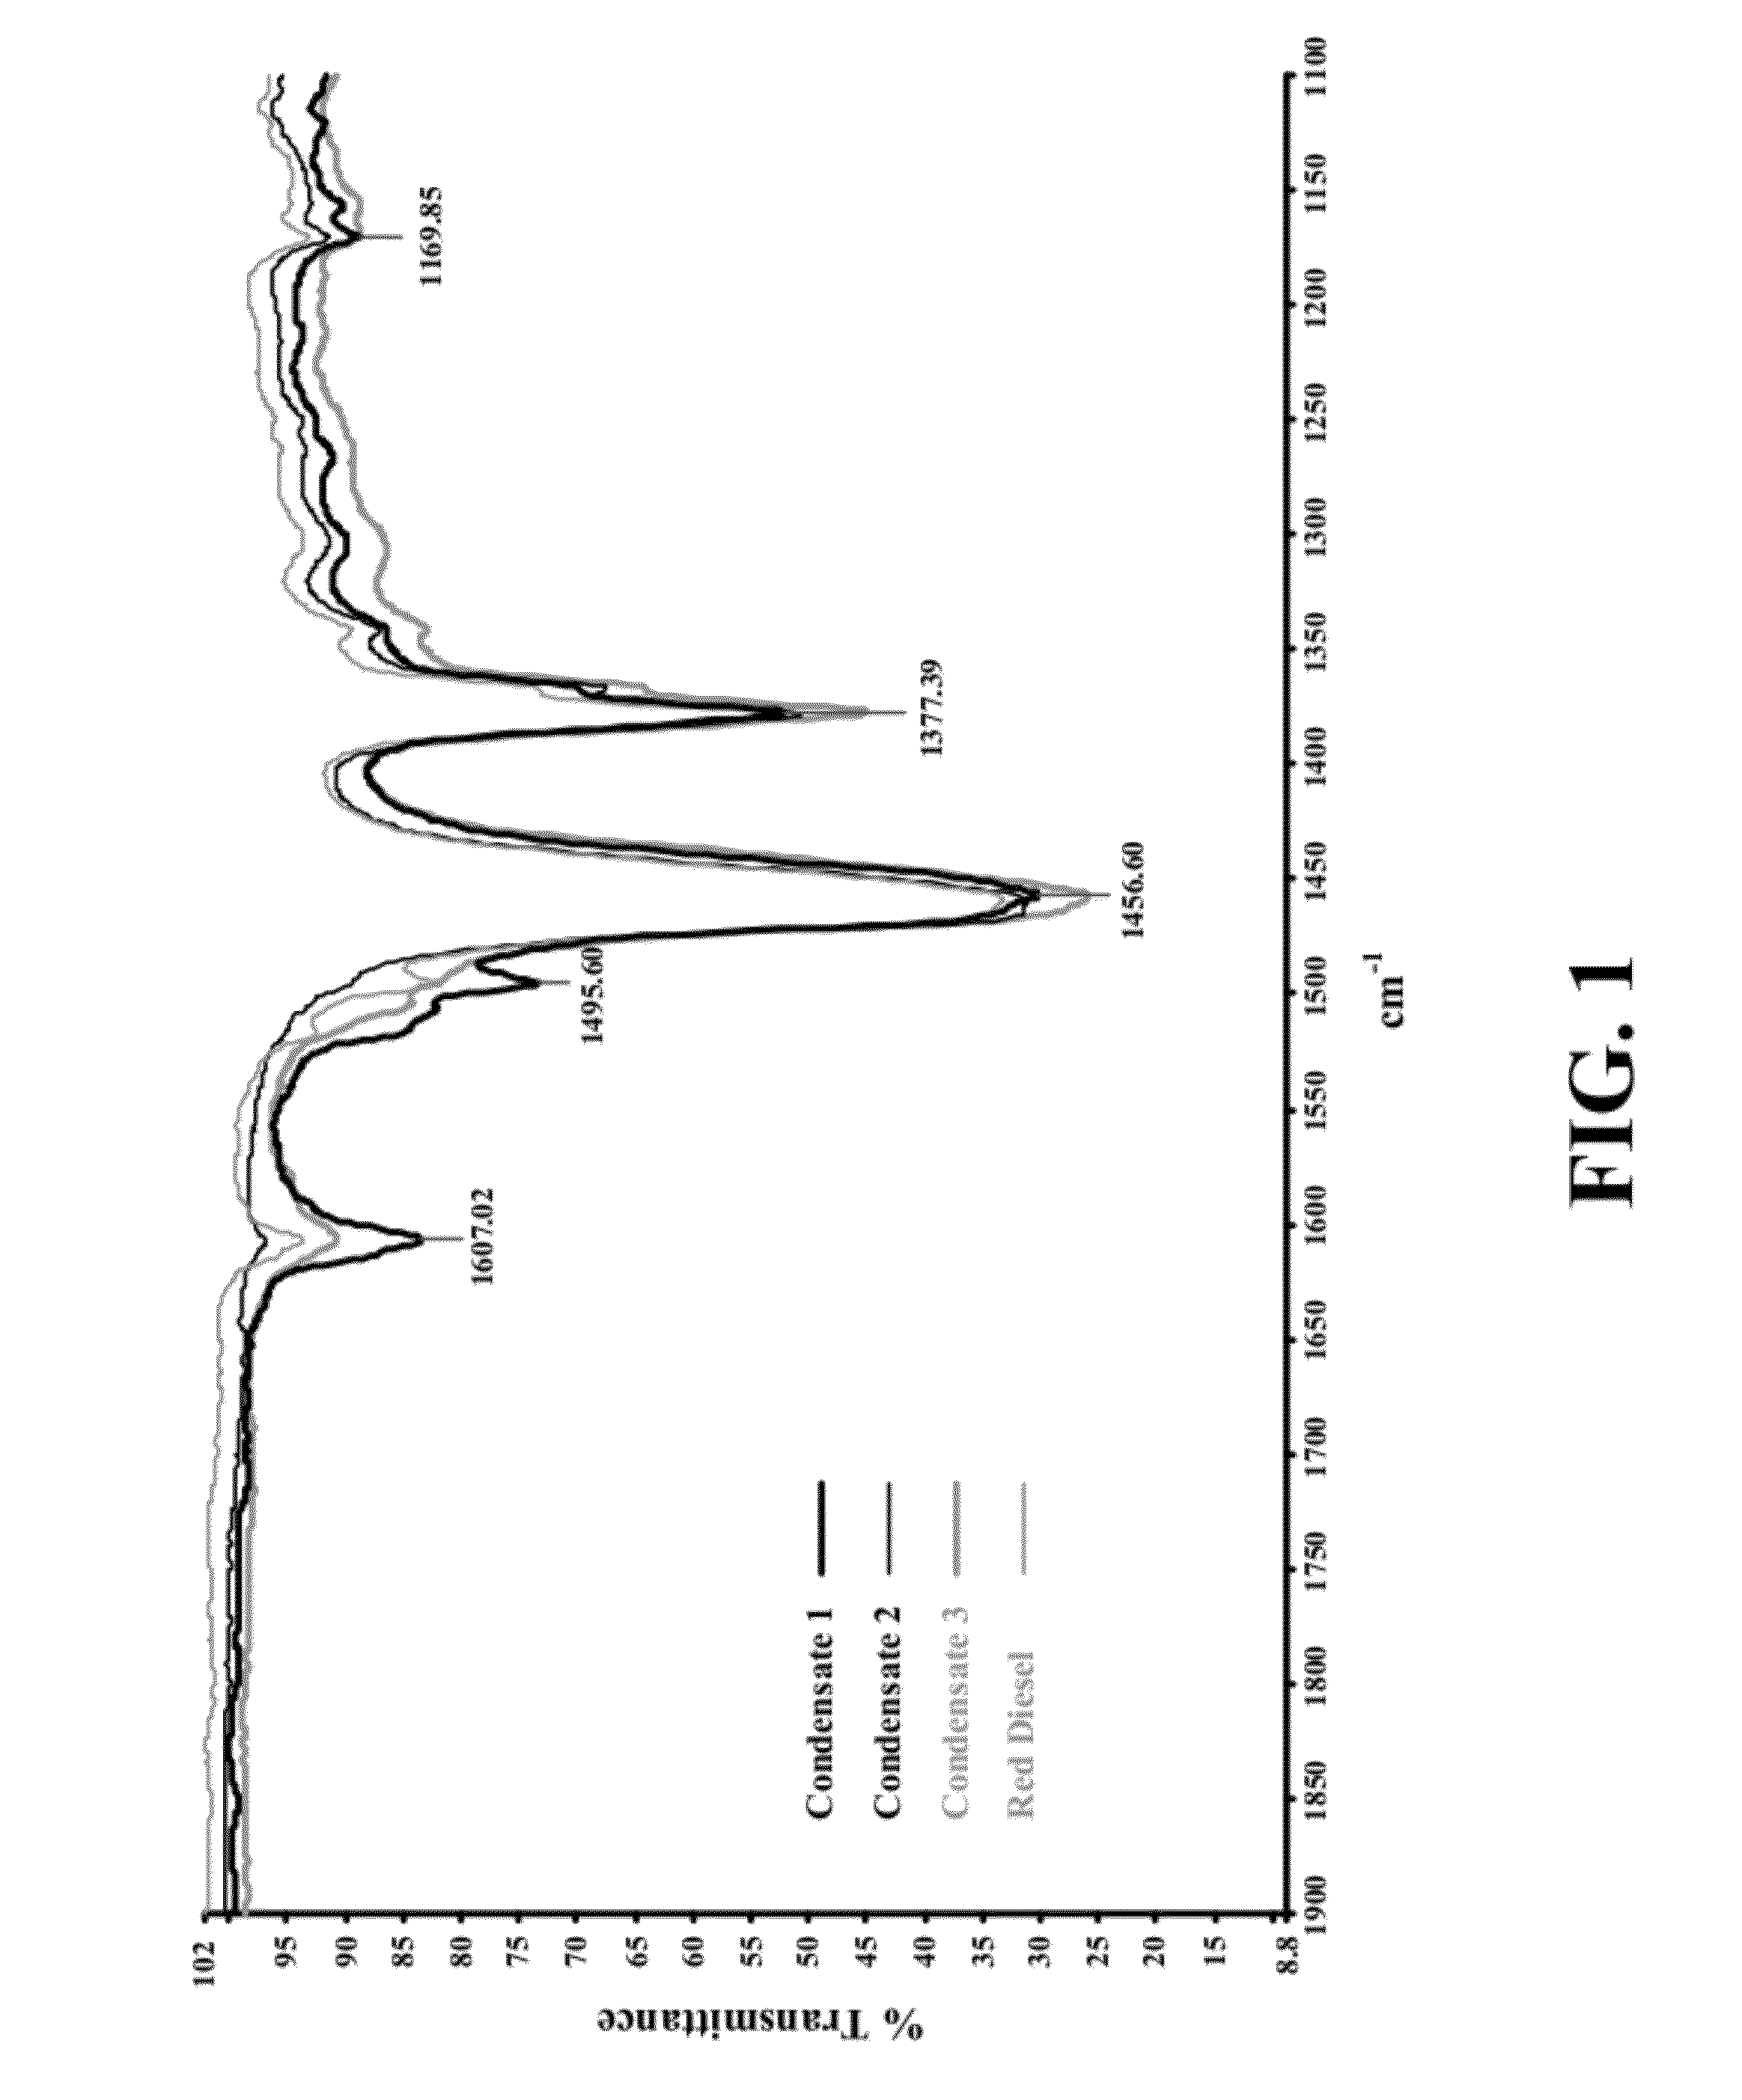 Complementary surfactant compositions and methods for making and using same